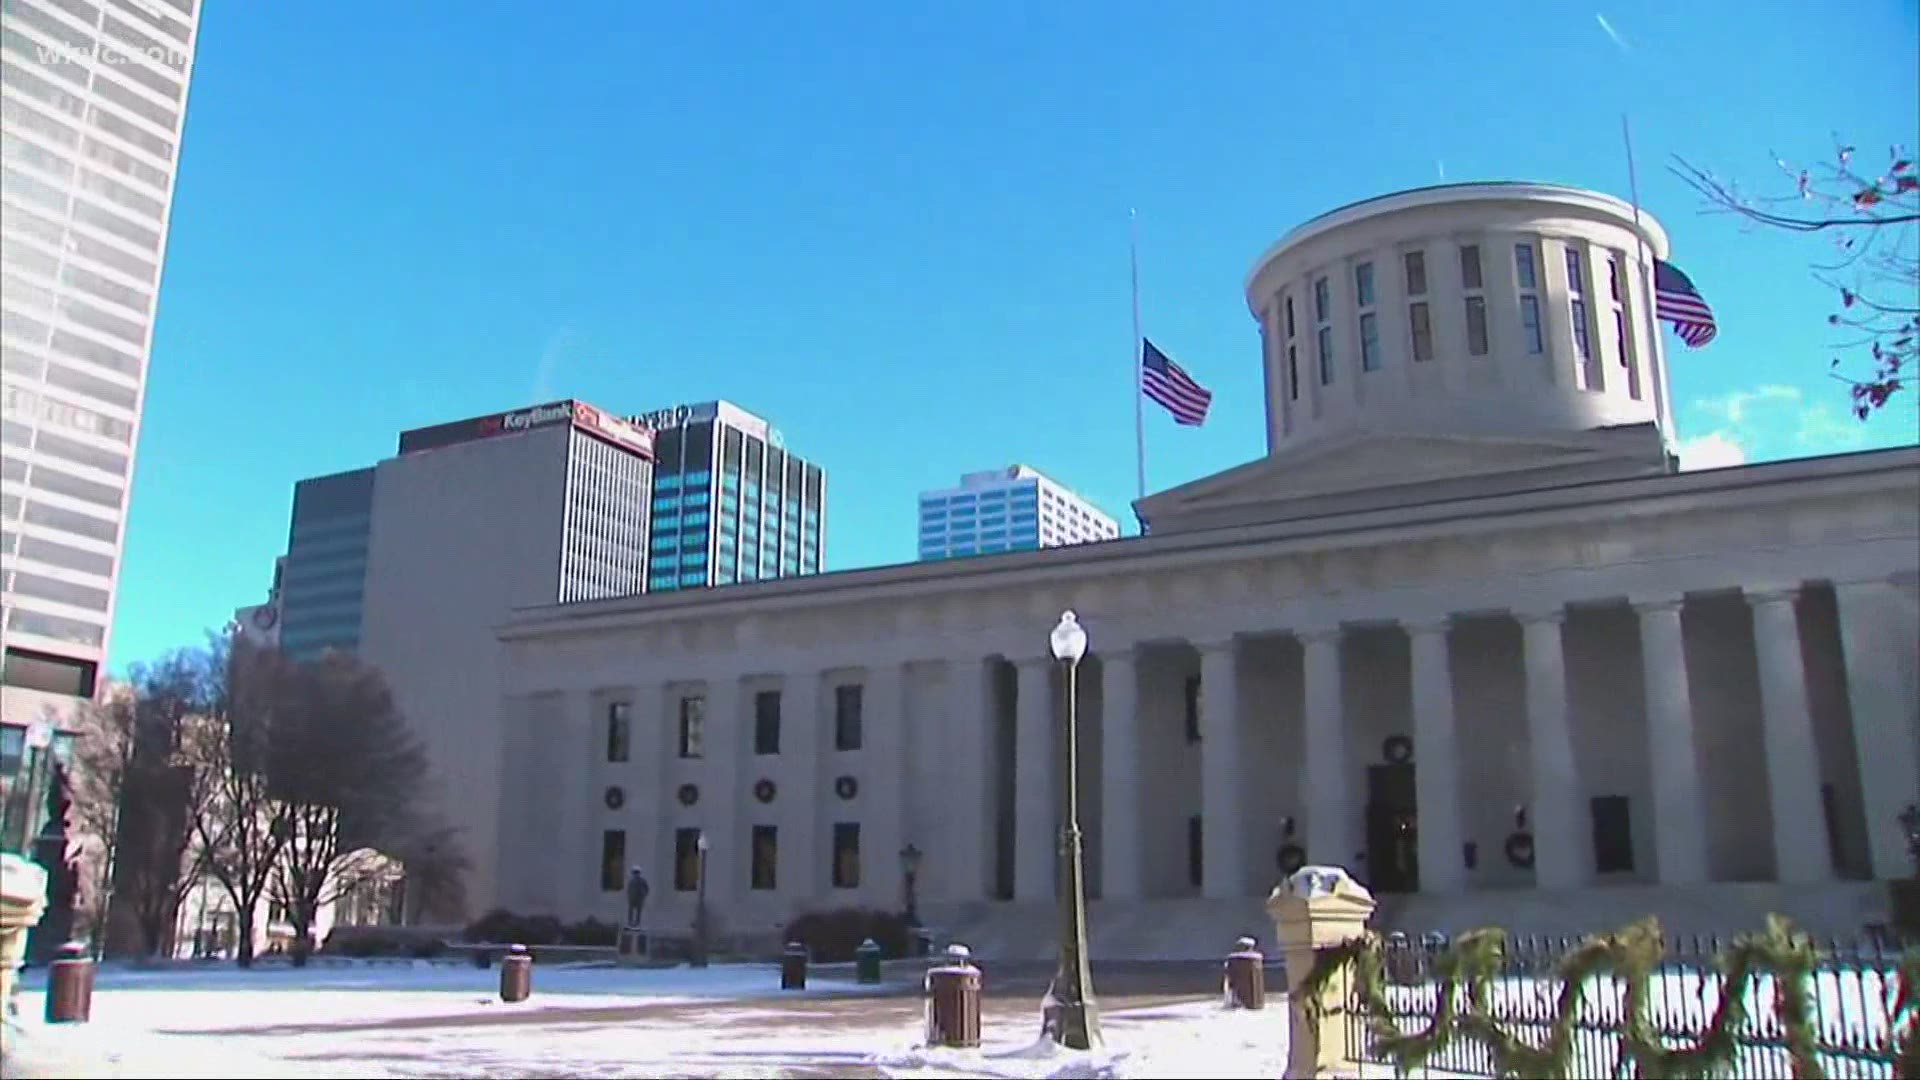 The bill was passed by the Ohio House late on Thursday. It will now go back to the Senate for a vote before it would head to the desk of Gov. Mike DeWine.